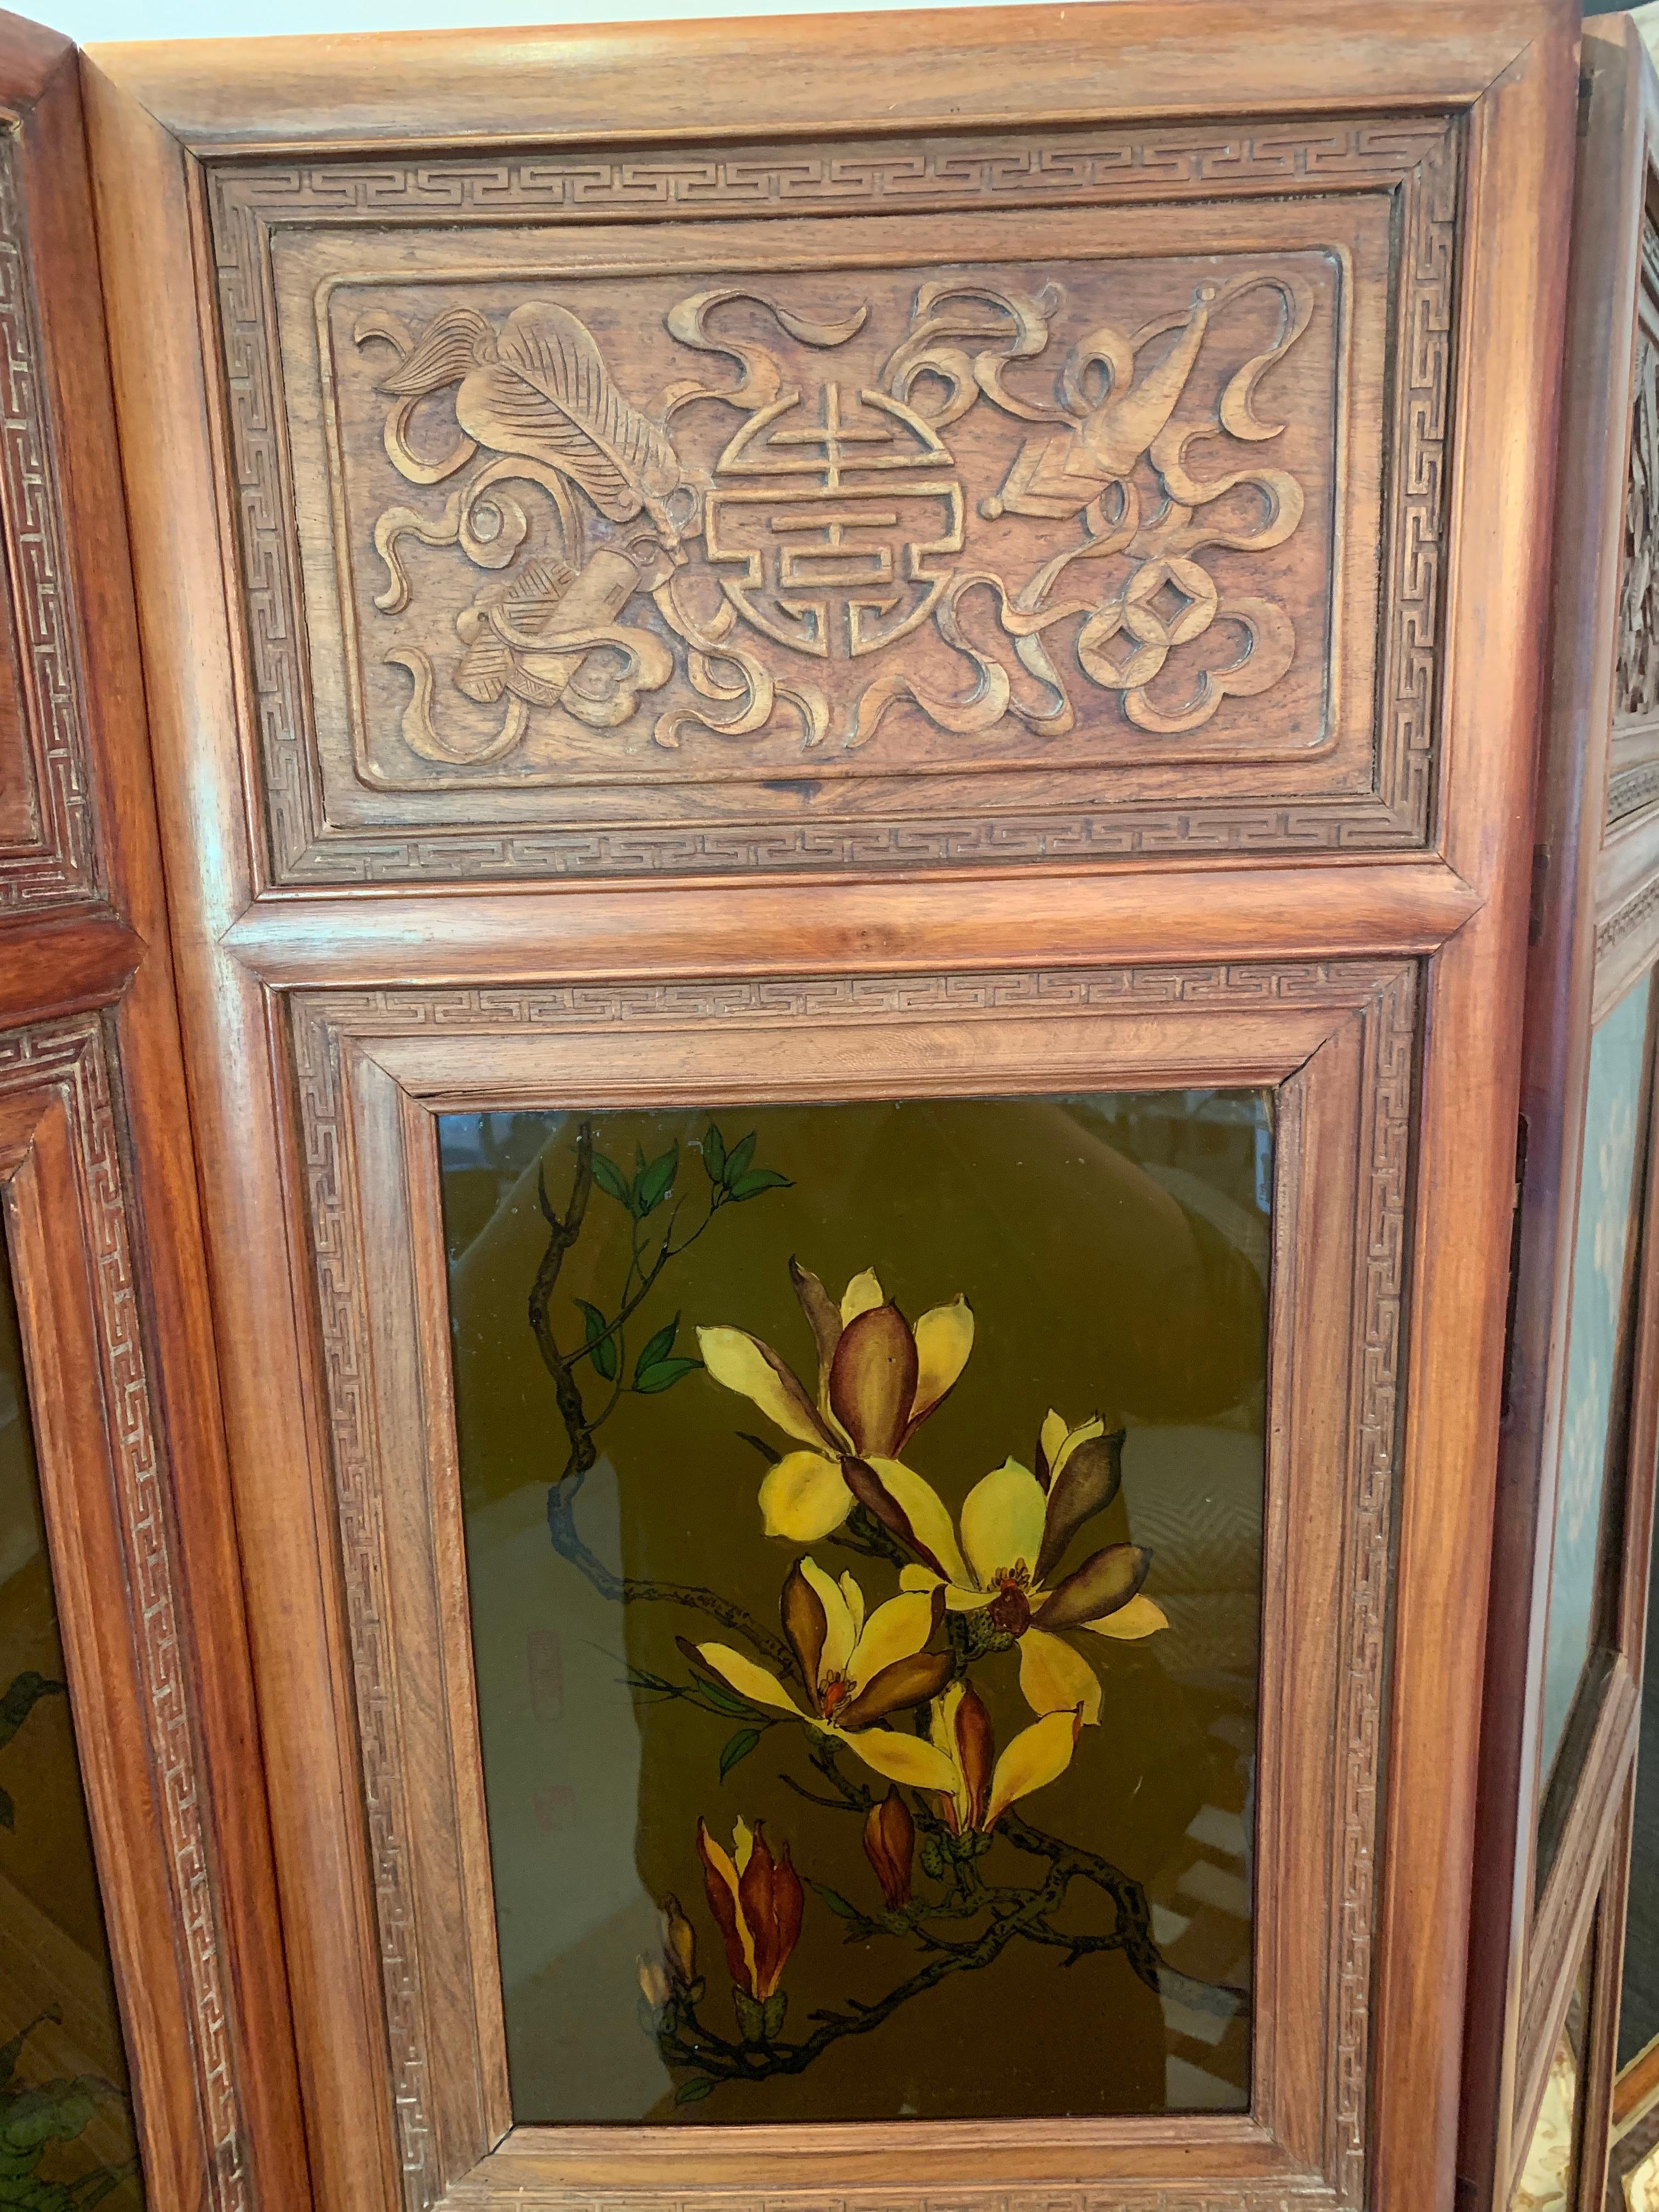 Chinese Export Truly Magnificent Large Carved Wood Hong Kong Screen with Paintings on Glass